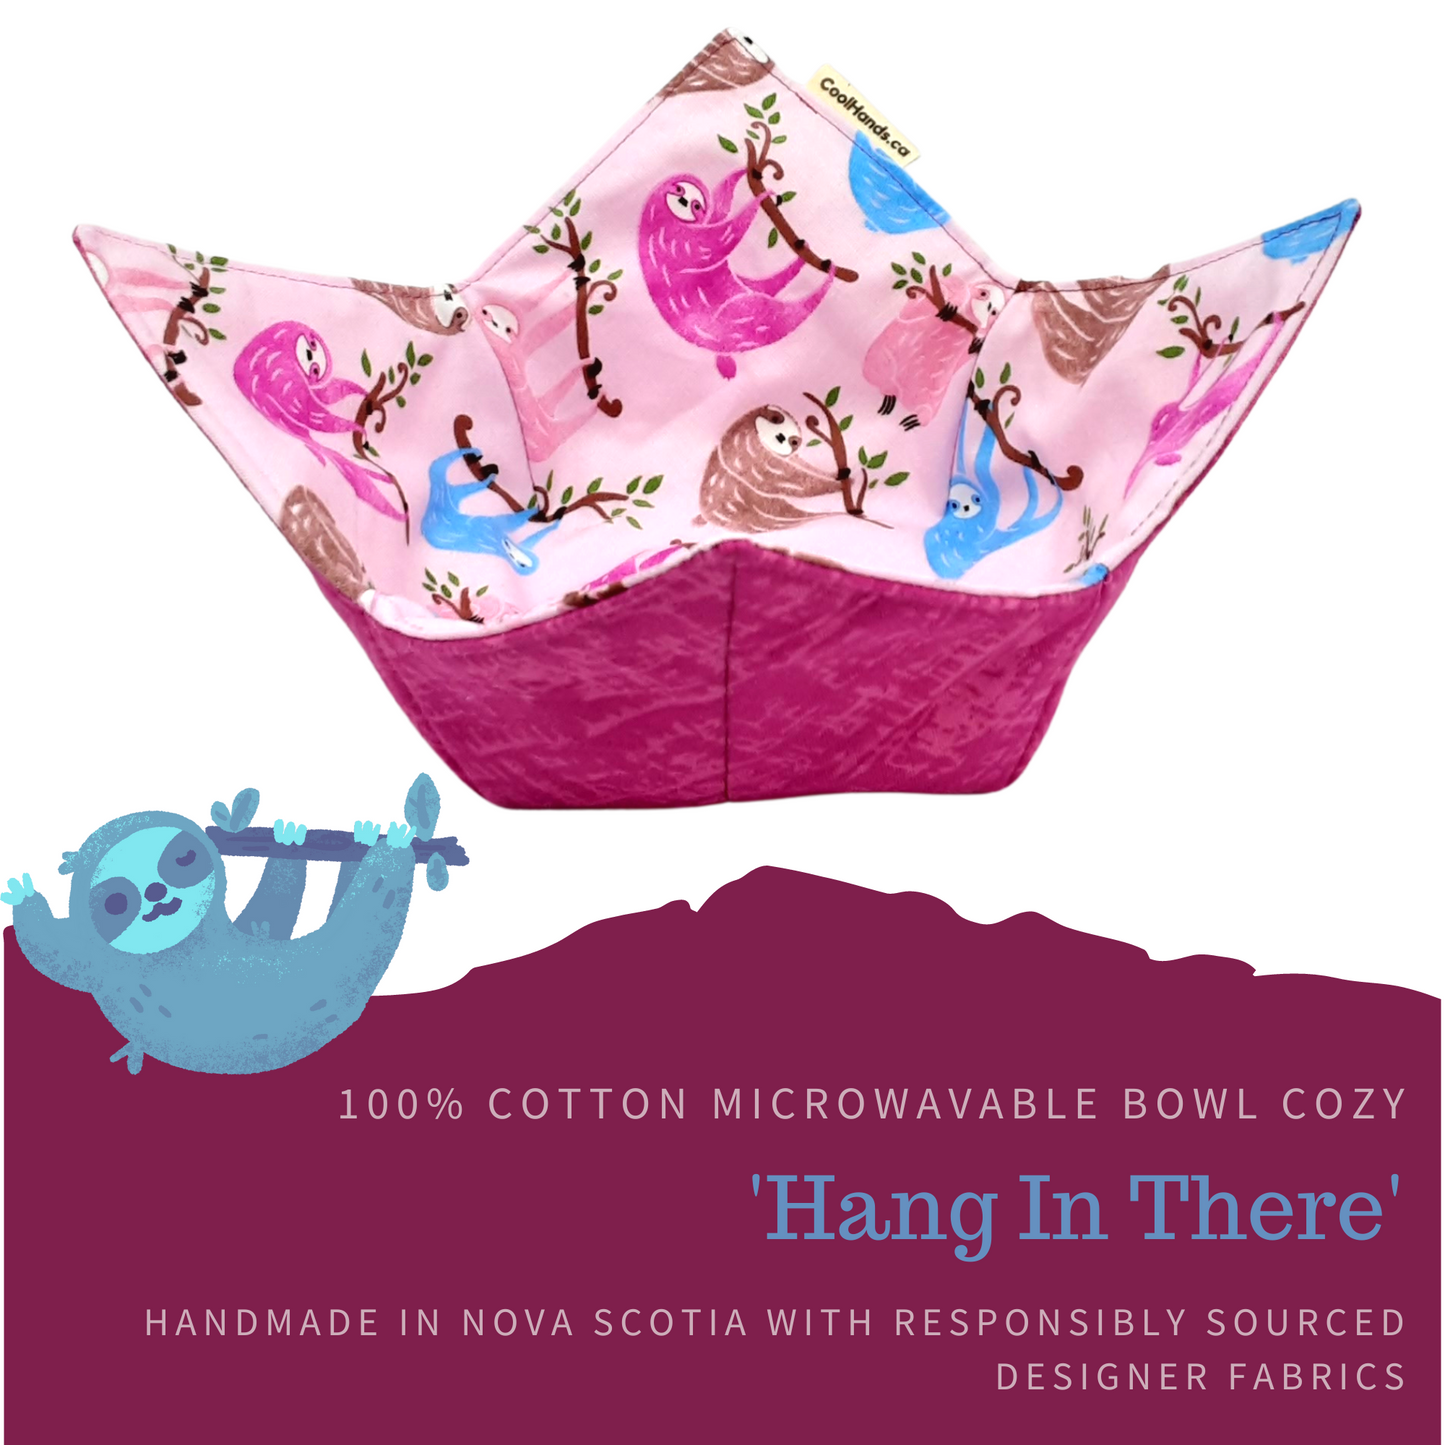 100% Cotton Microwavable Bowl Cozy - Hang In There